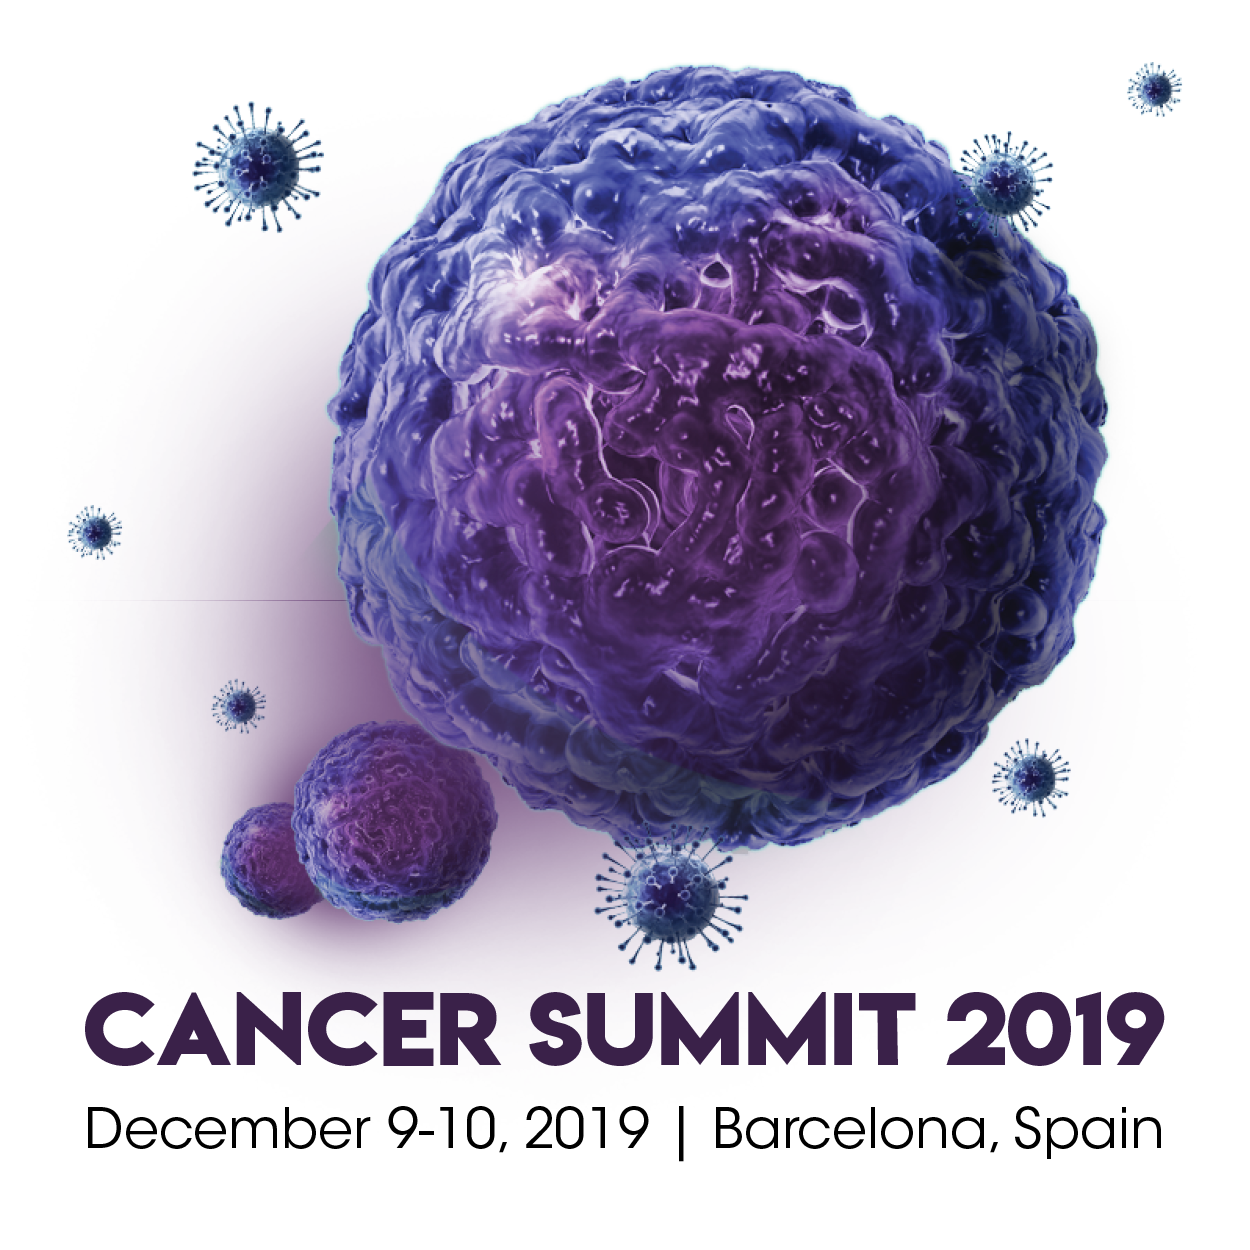 27th International Conference on Cancer Research and Oncology